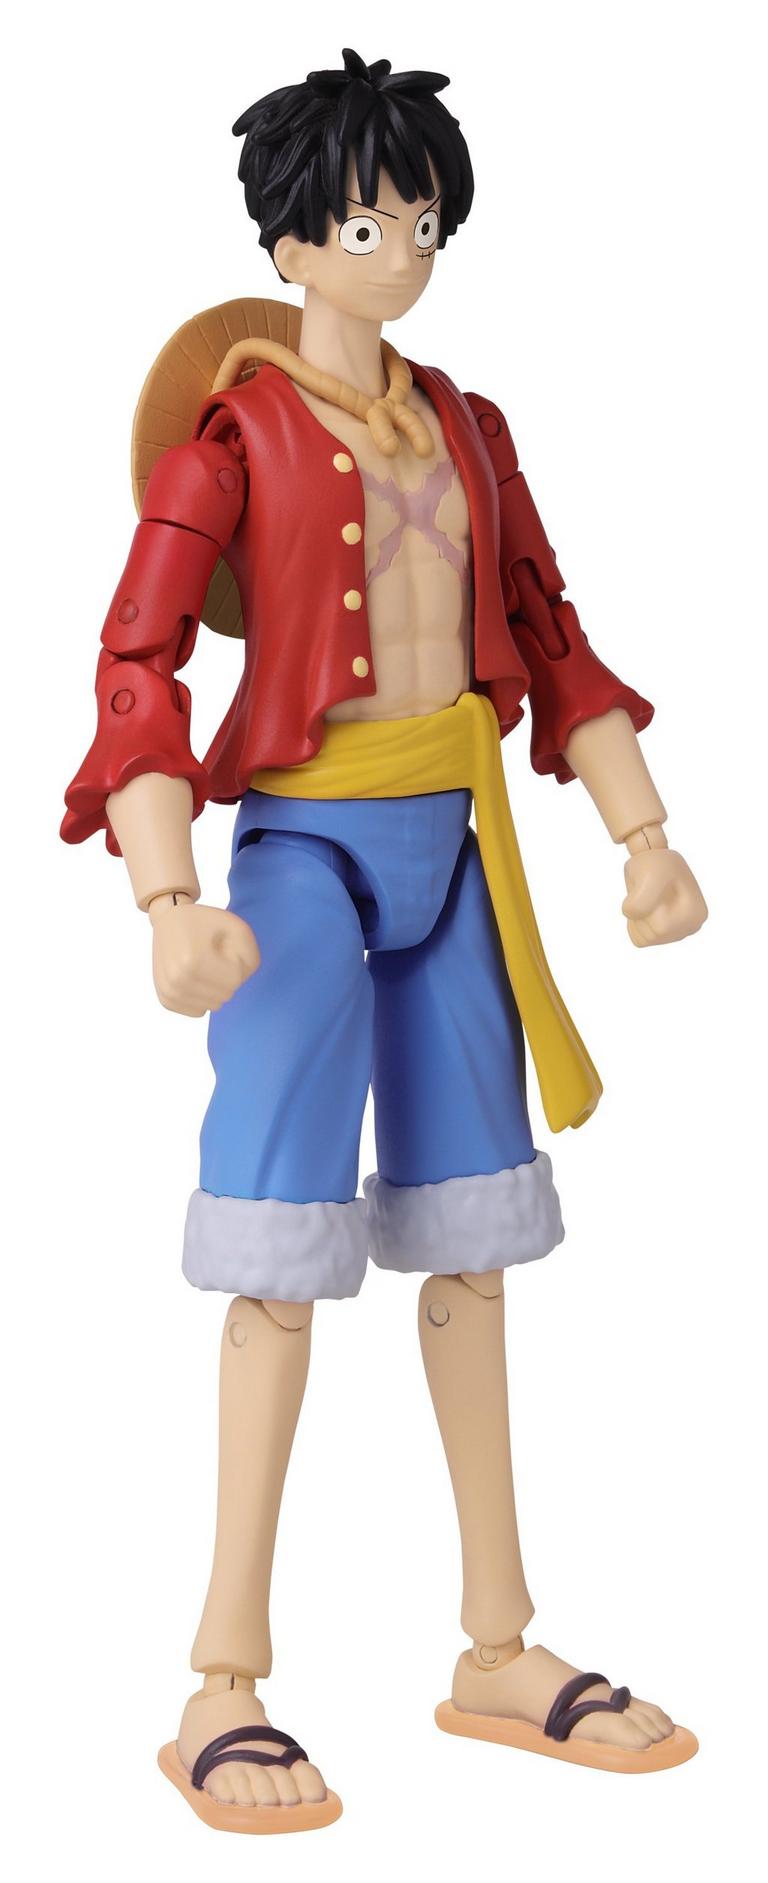 Bandai One Piece Luffy Anime Heroes 6.5-in Action Figure